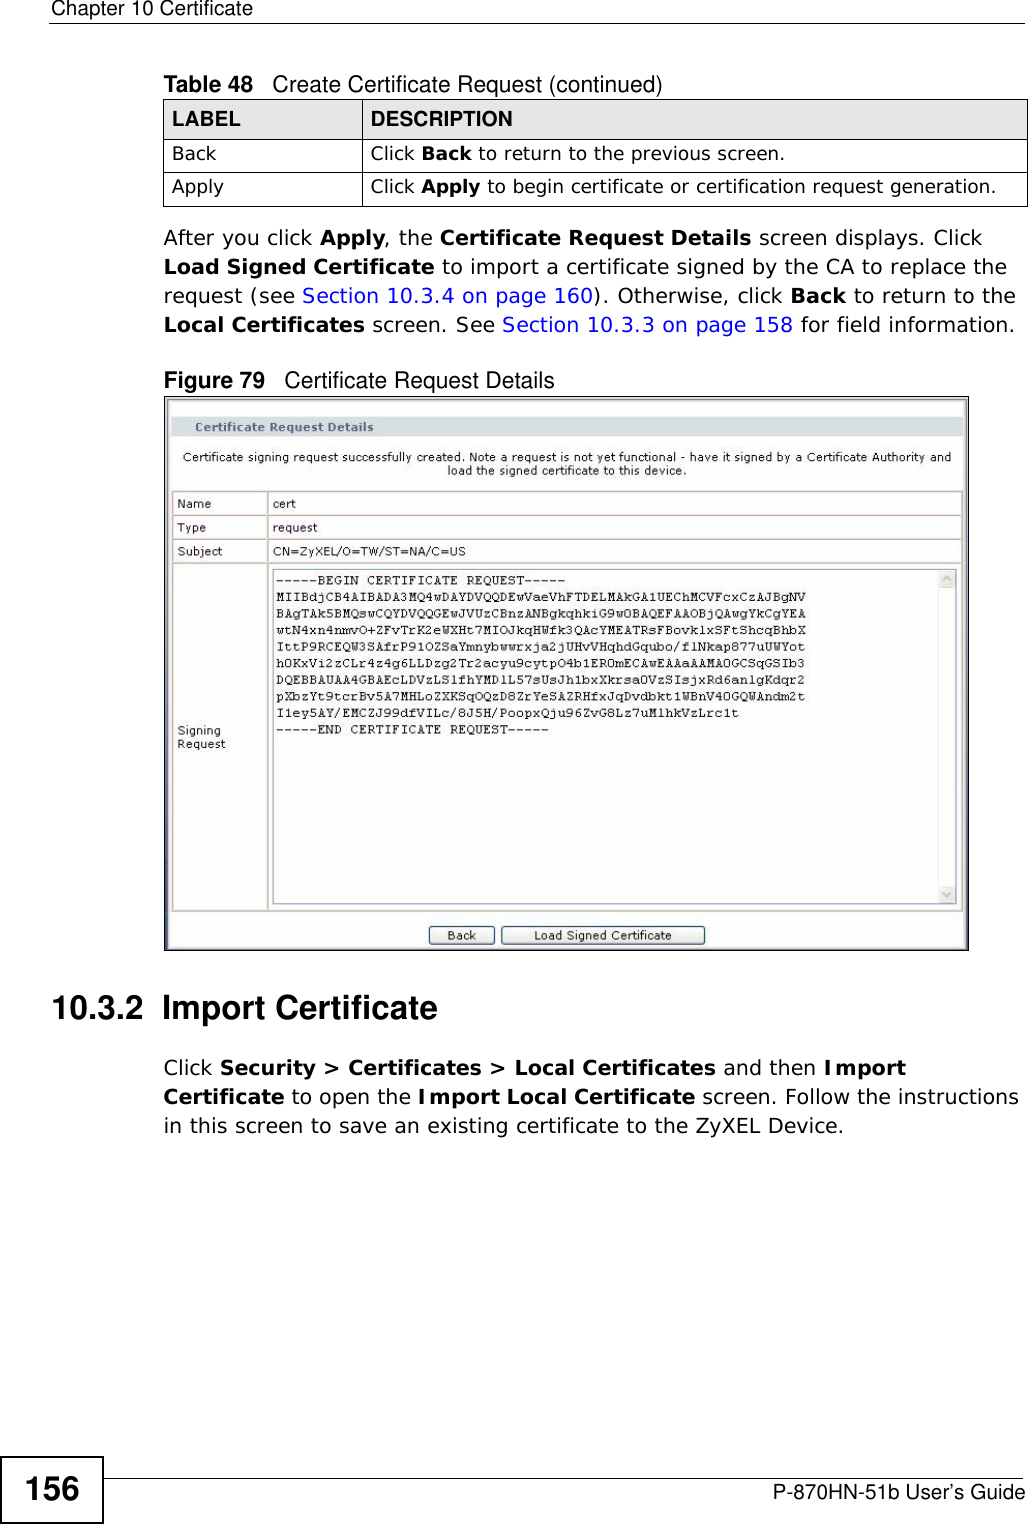 Chapter 10 CertificateP-870HN-51b User’s Guide156After you click Apply, the Certificate Request Details screen displays. Click Load Signed Certificate to import a certificate signed by the CA to replace the request (see Section 10.3.4 on page 160). Otherwise, click Back to return to the Local Certificates screen. See Section 10.3.3 on page 158 for field information.Figure 79   Certificate Request Details10.3.2  Import Certificate Click Security &gt; Certificates &gt; Local Certificates and then Import Certificate to open the Import Local Certificate screen. Follow the instructions in this screen to save an existing certificate to the ZyXEL Device. Back Click Back to return to the previous screen.Apply Click Apply to begin certificate or certification request generation.Table 48   Create Certificate Request (continued)LABEL DESCRIPTION